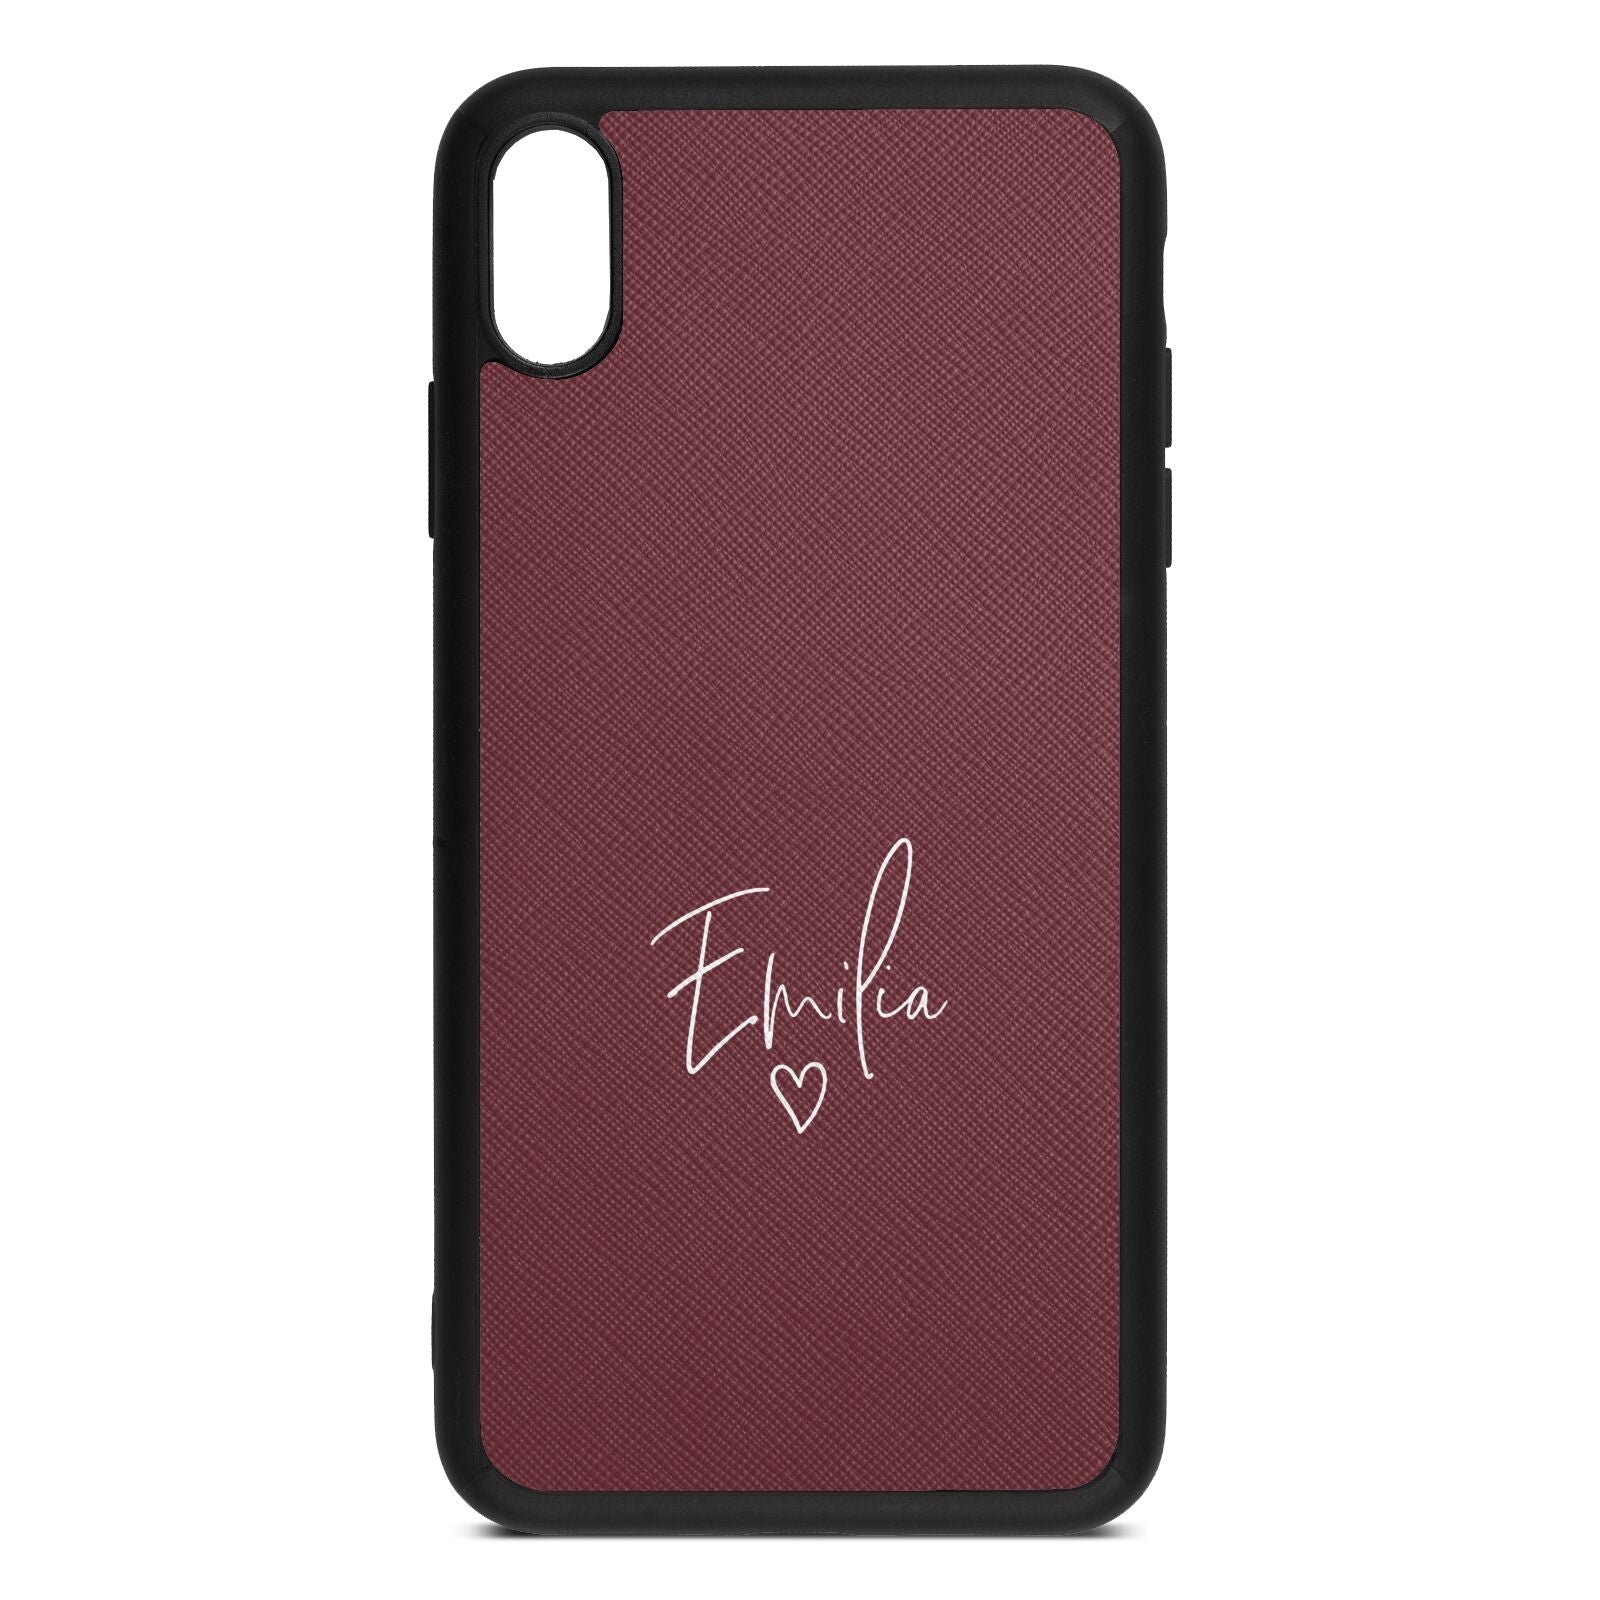 White Handwritten Name Transparent Rose Brown Saffiano Leather iPhone Xs Max Case